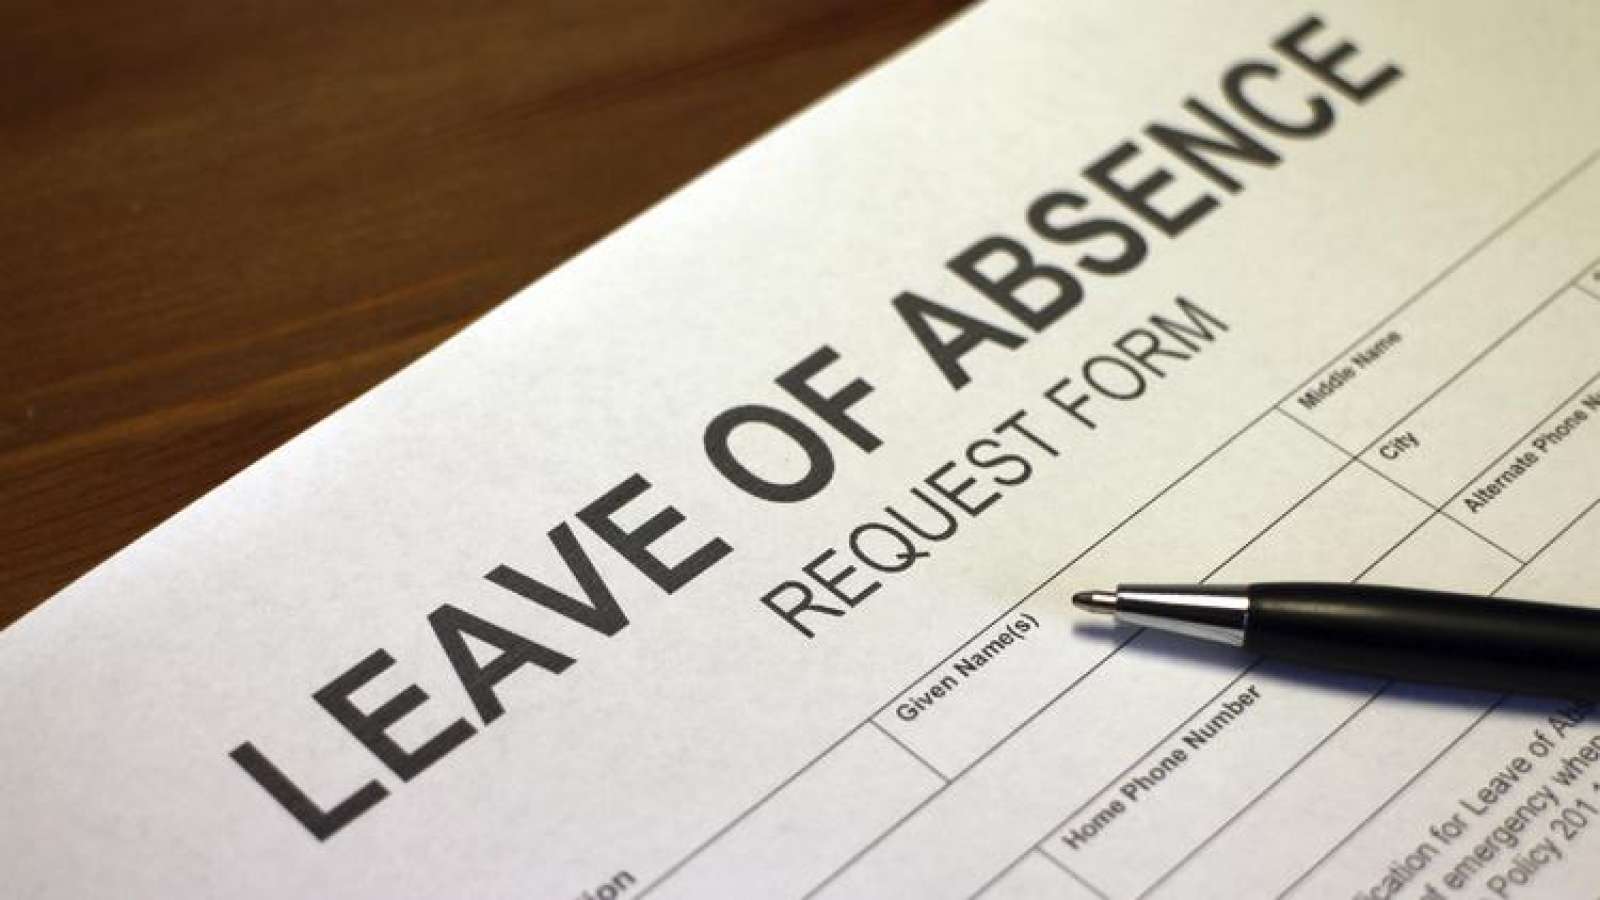 U.S. Department of Labor States Employees May Not Decline or Defer FMLA Leave of a Covered Absence